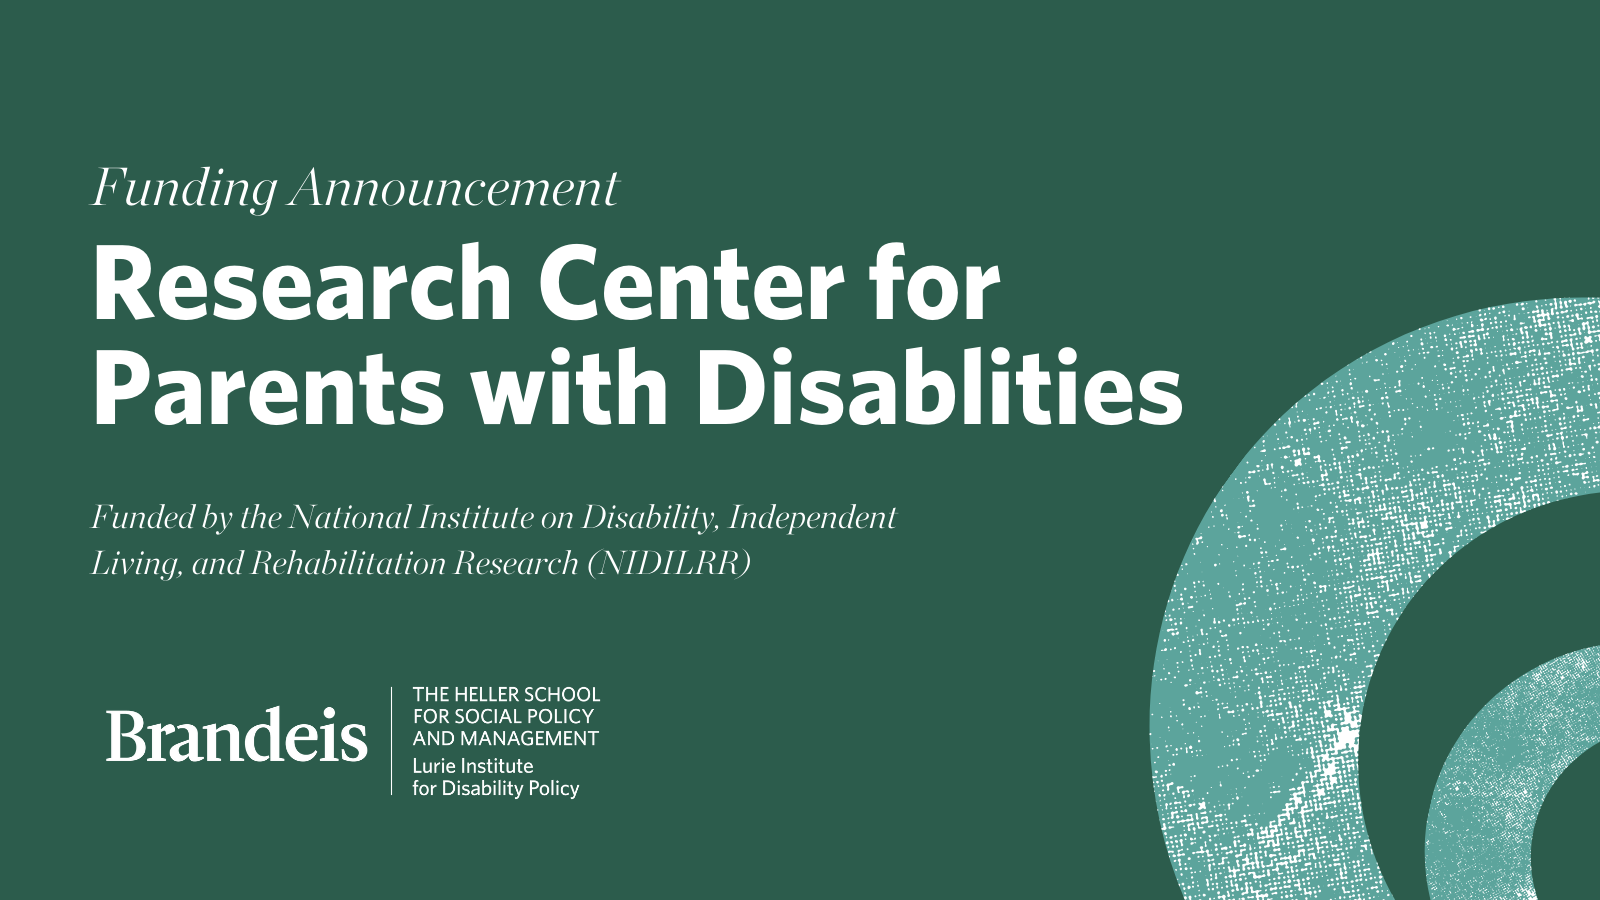 Research Center for Parents with Disabilities, a Lurie Institute Center, Receives 5-Year NIDILRR Grant